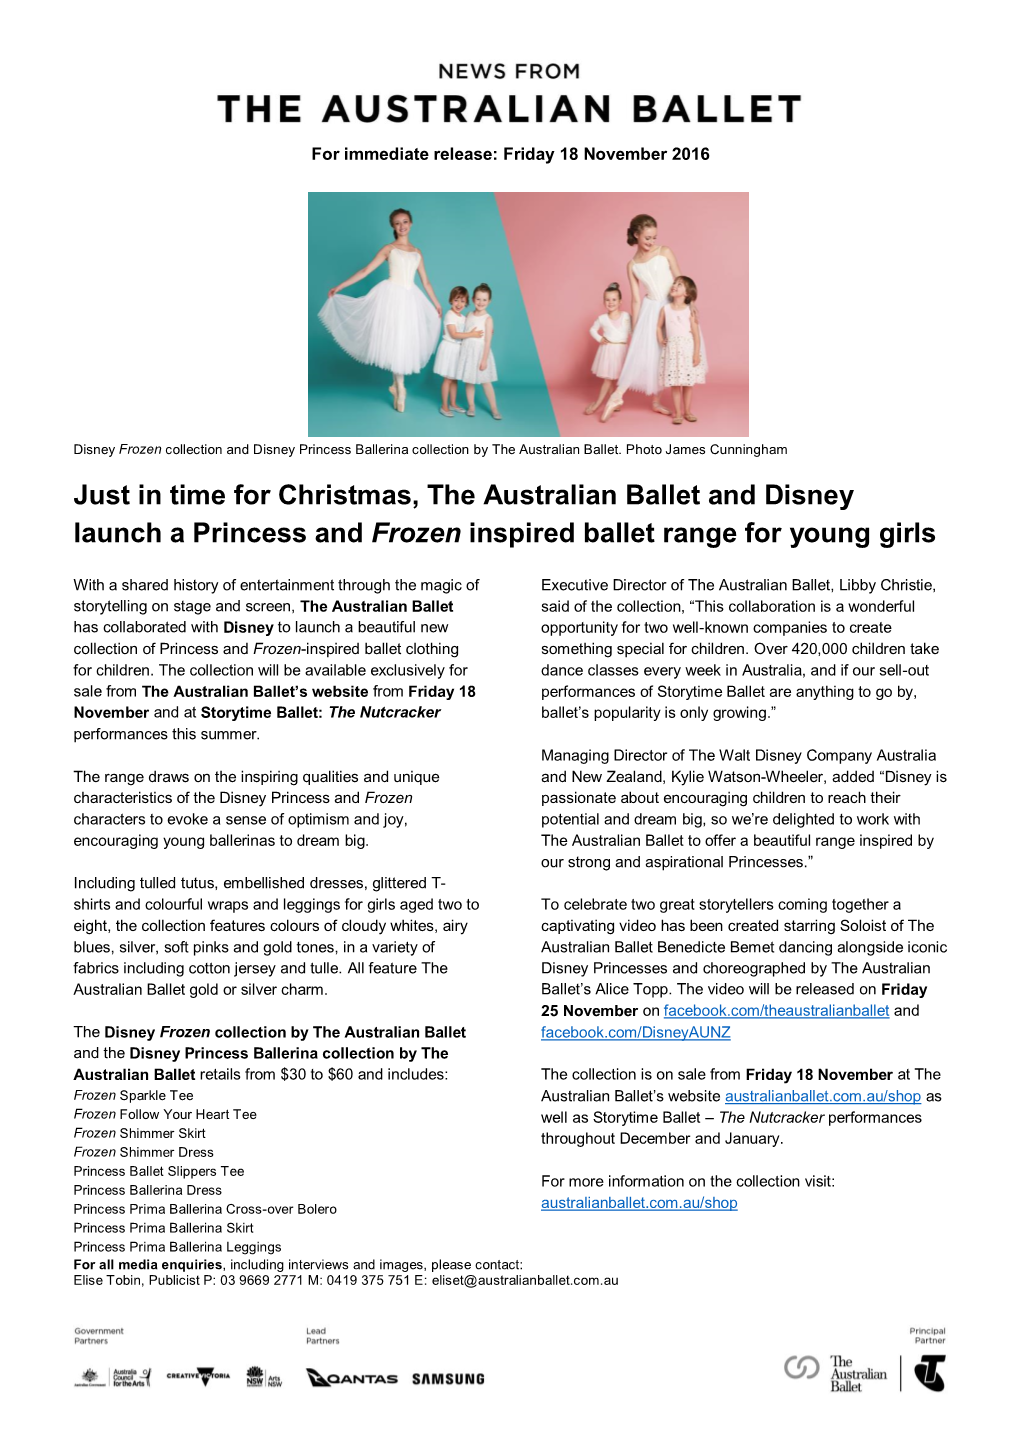 Just in Time for Christmas, the Australian Ballet and Disney Launch a Princess and Frozen Inspired Ballet Range for Young Girls